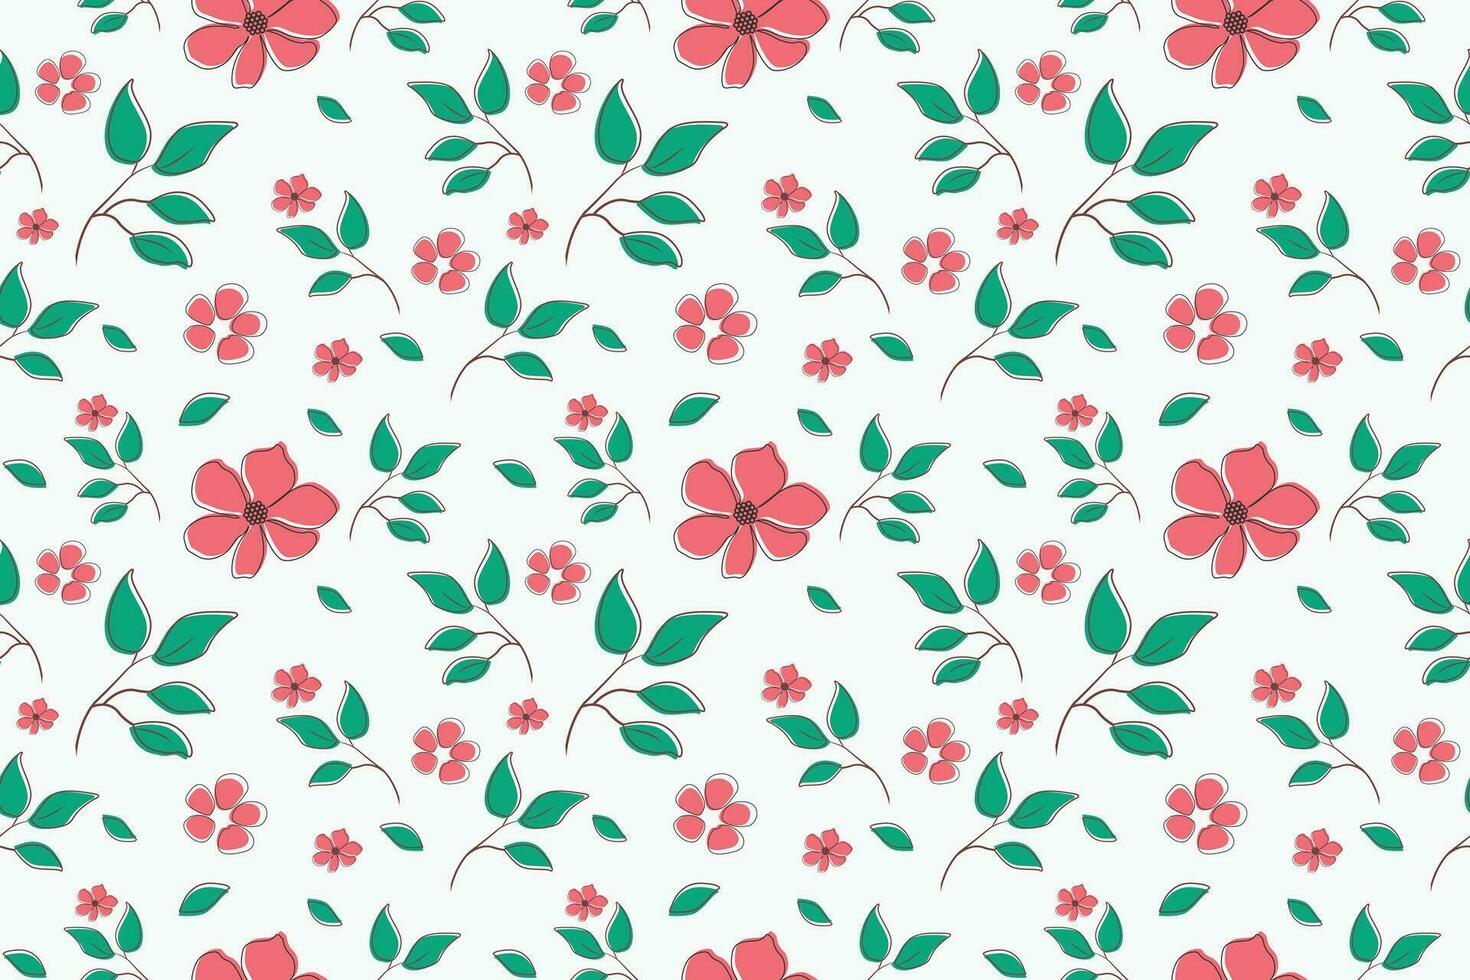 Red flowers with green leaves are spread on a white background. Seamless repeating pattern vector illustration design.